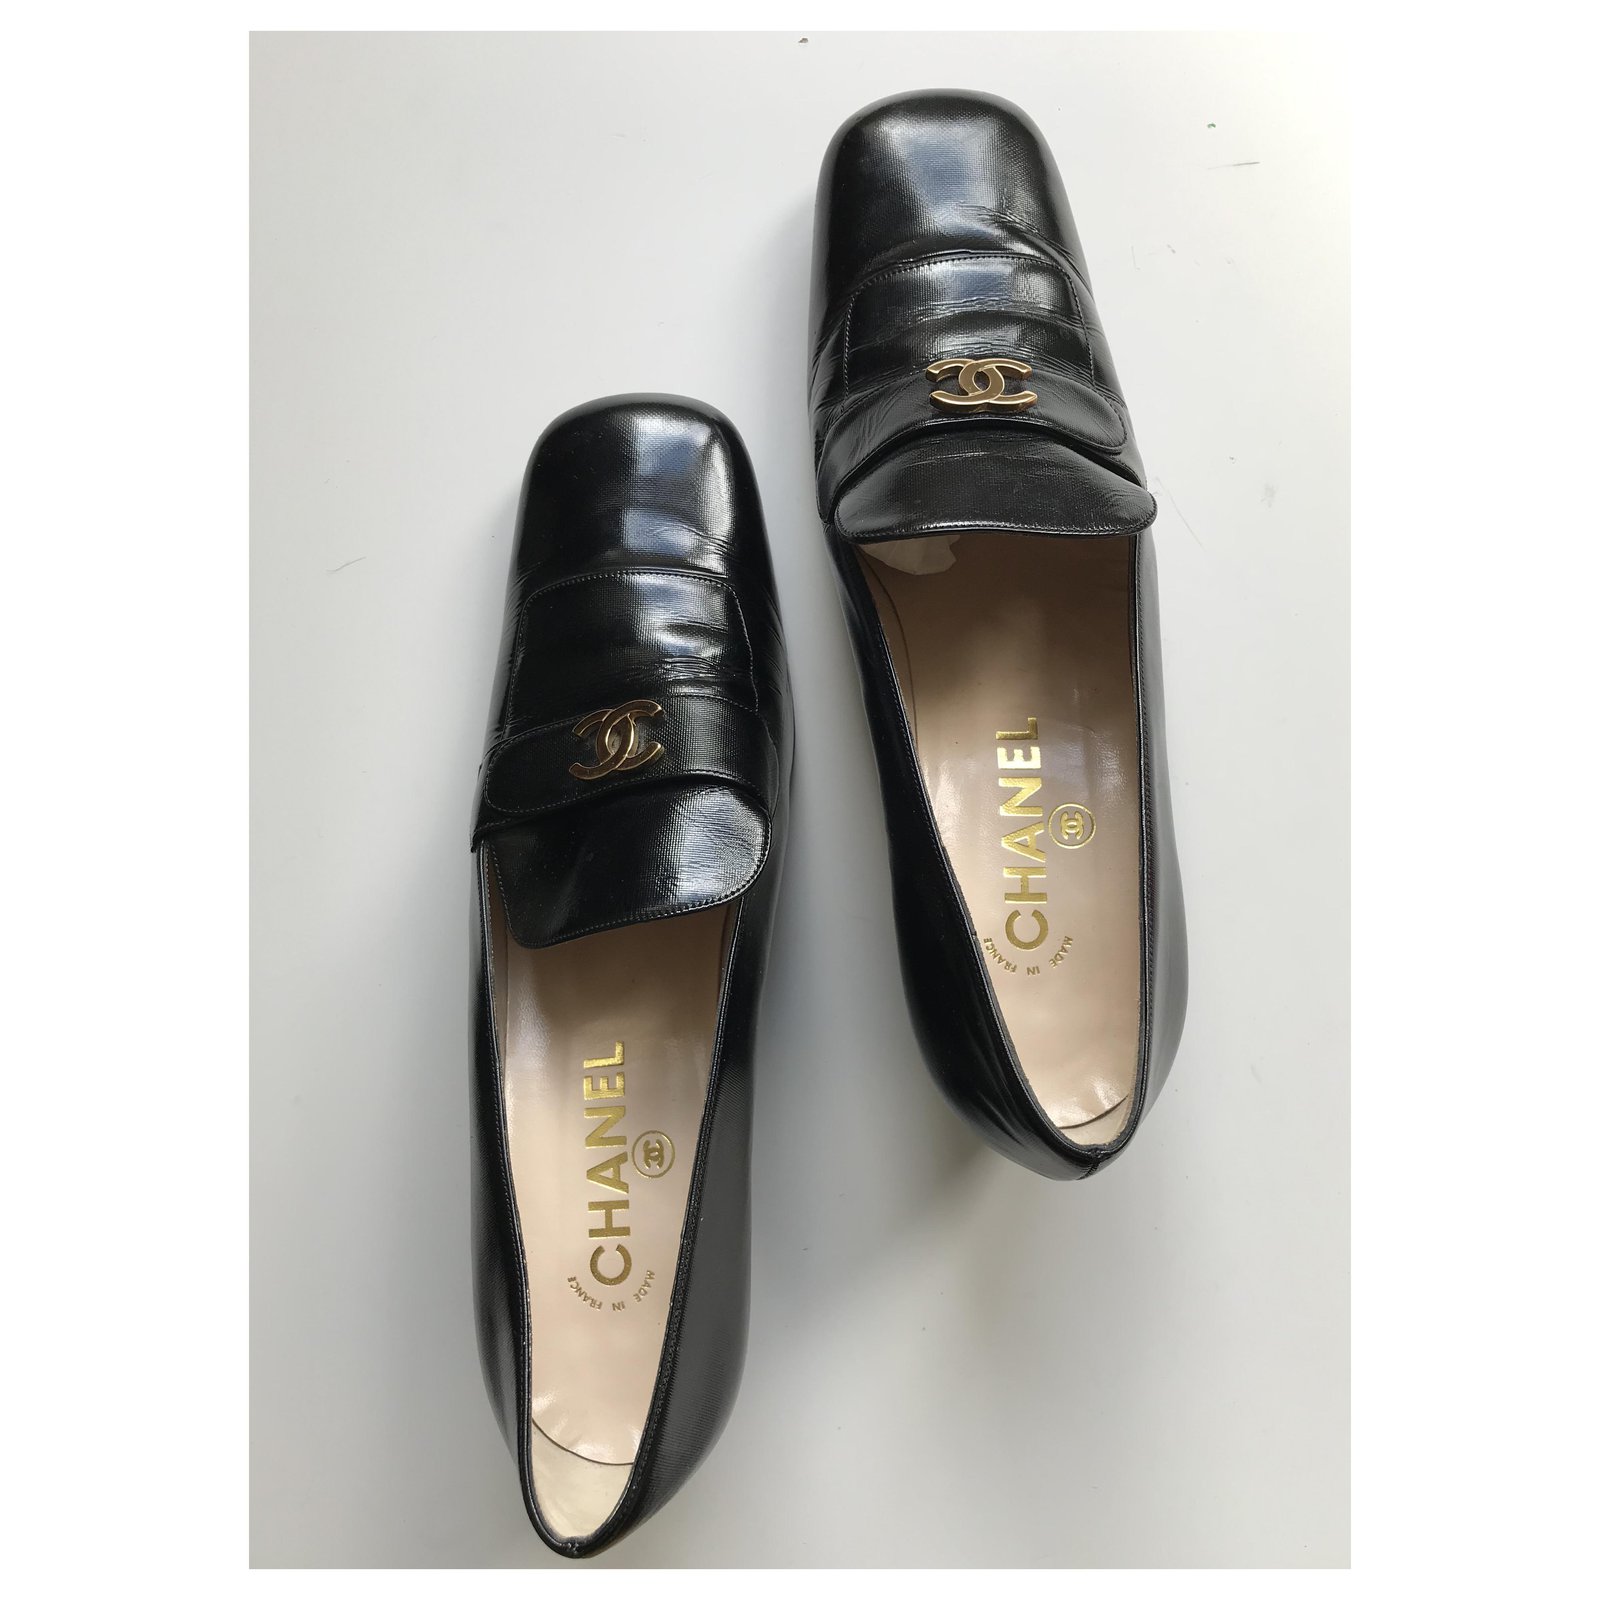 second hand chanel shoes